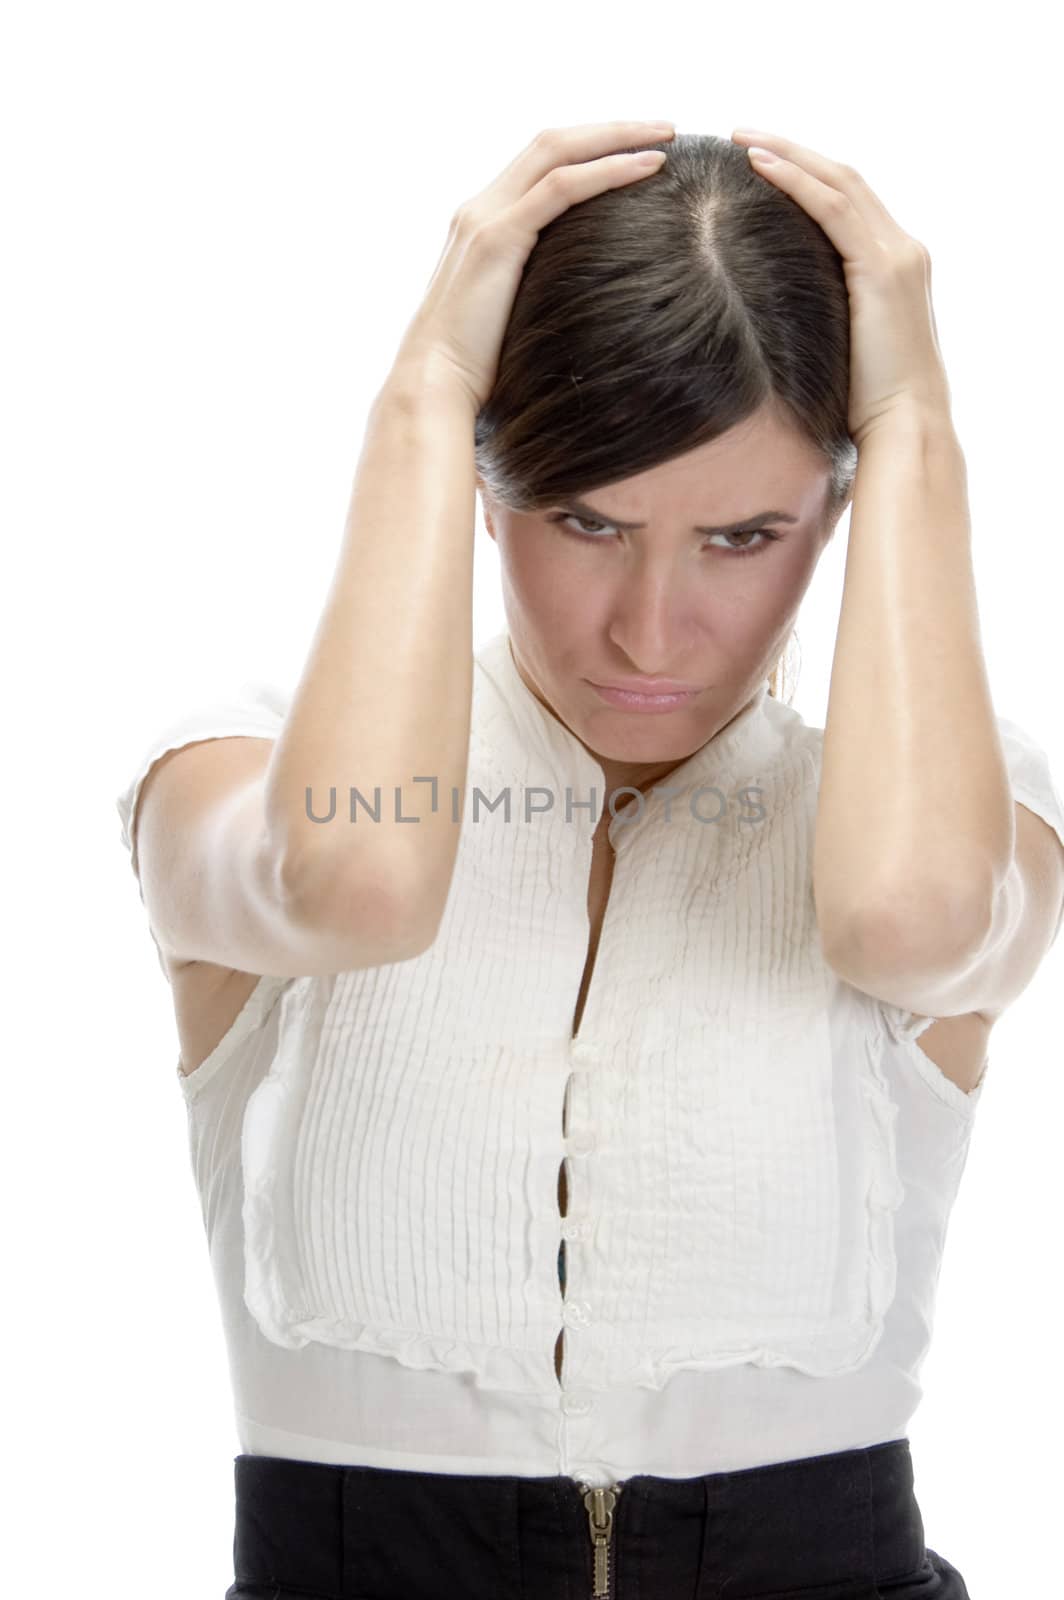 young woman in tension against white background